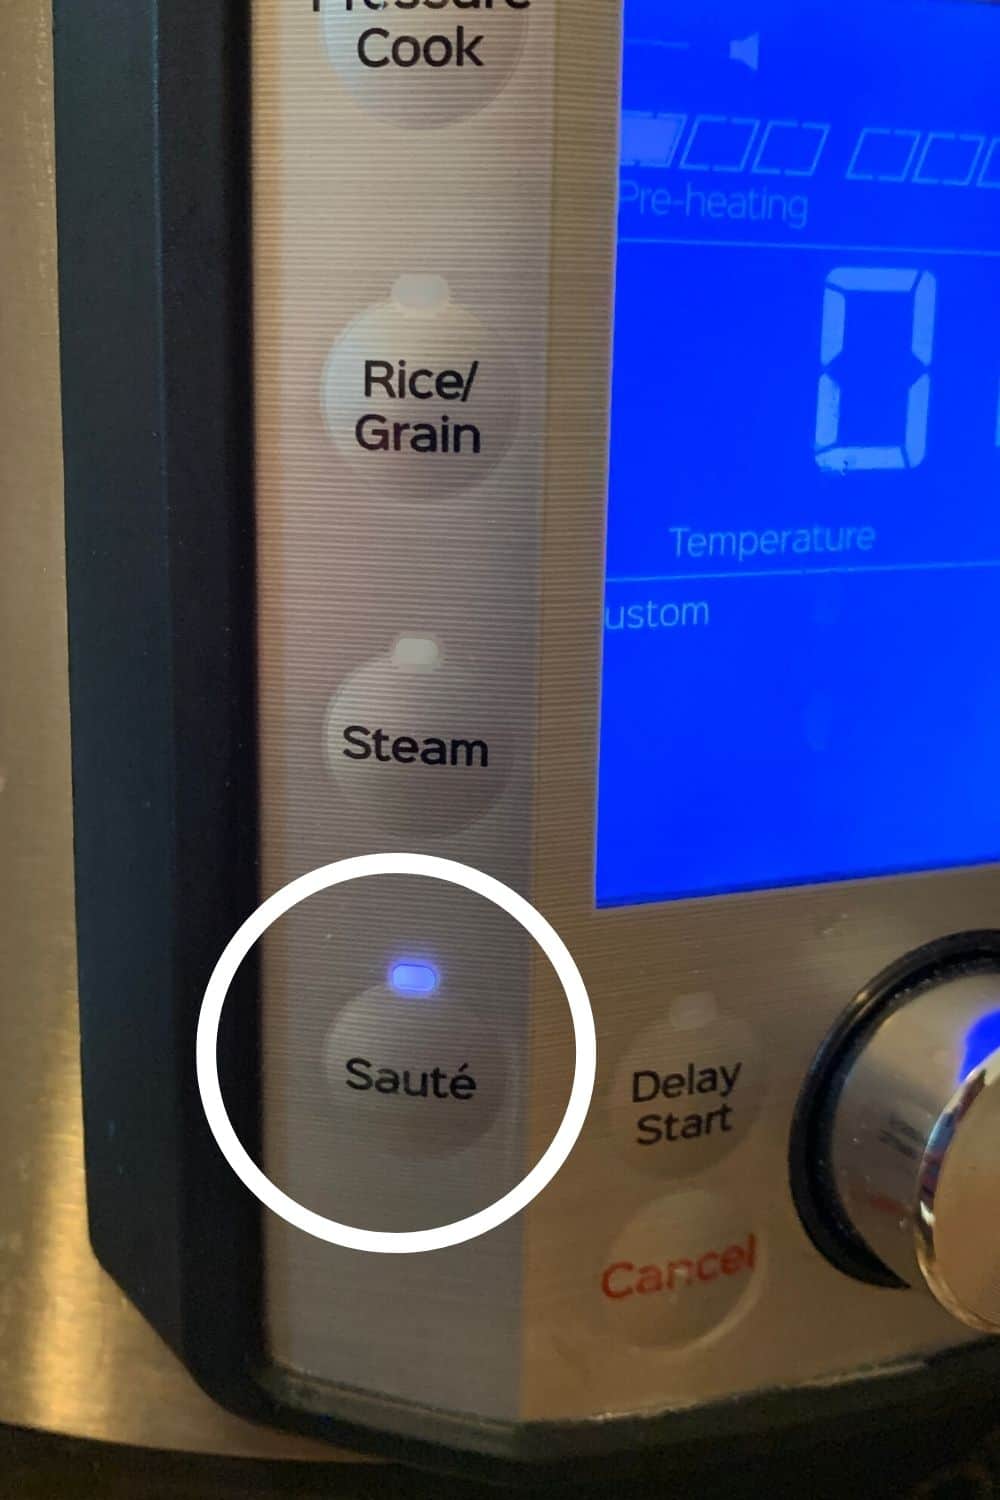 the control panel of an Instant Pot, with the Saute button circled